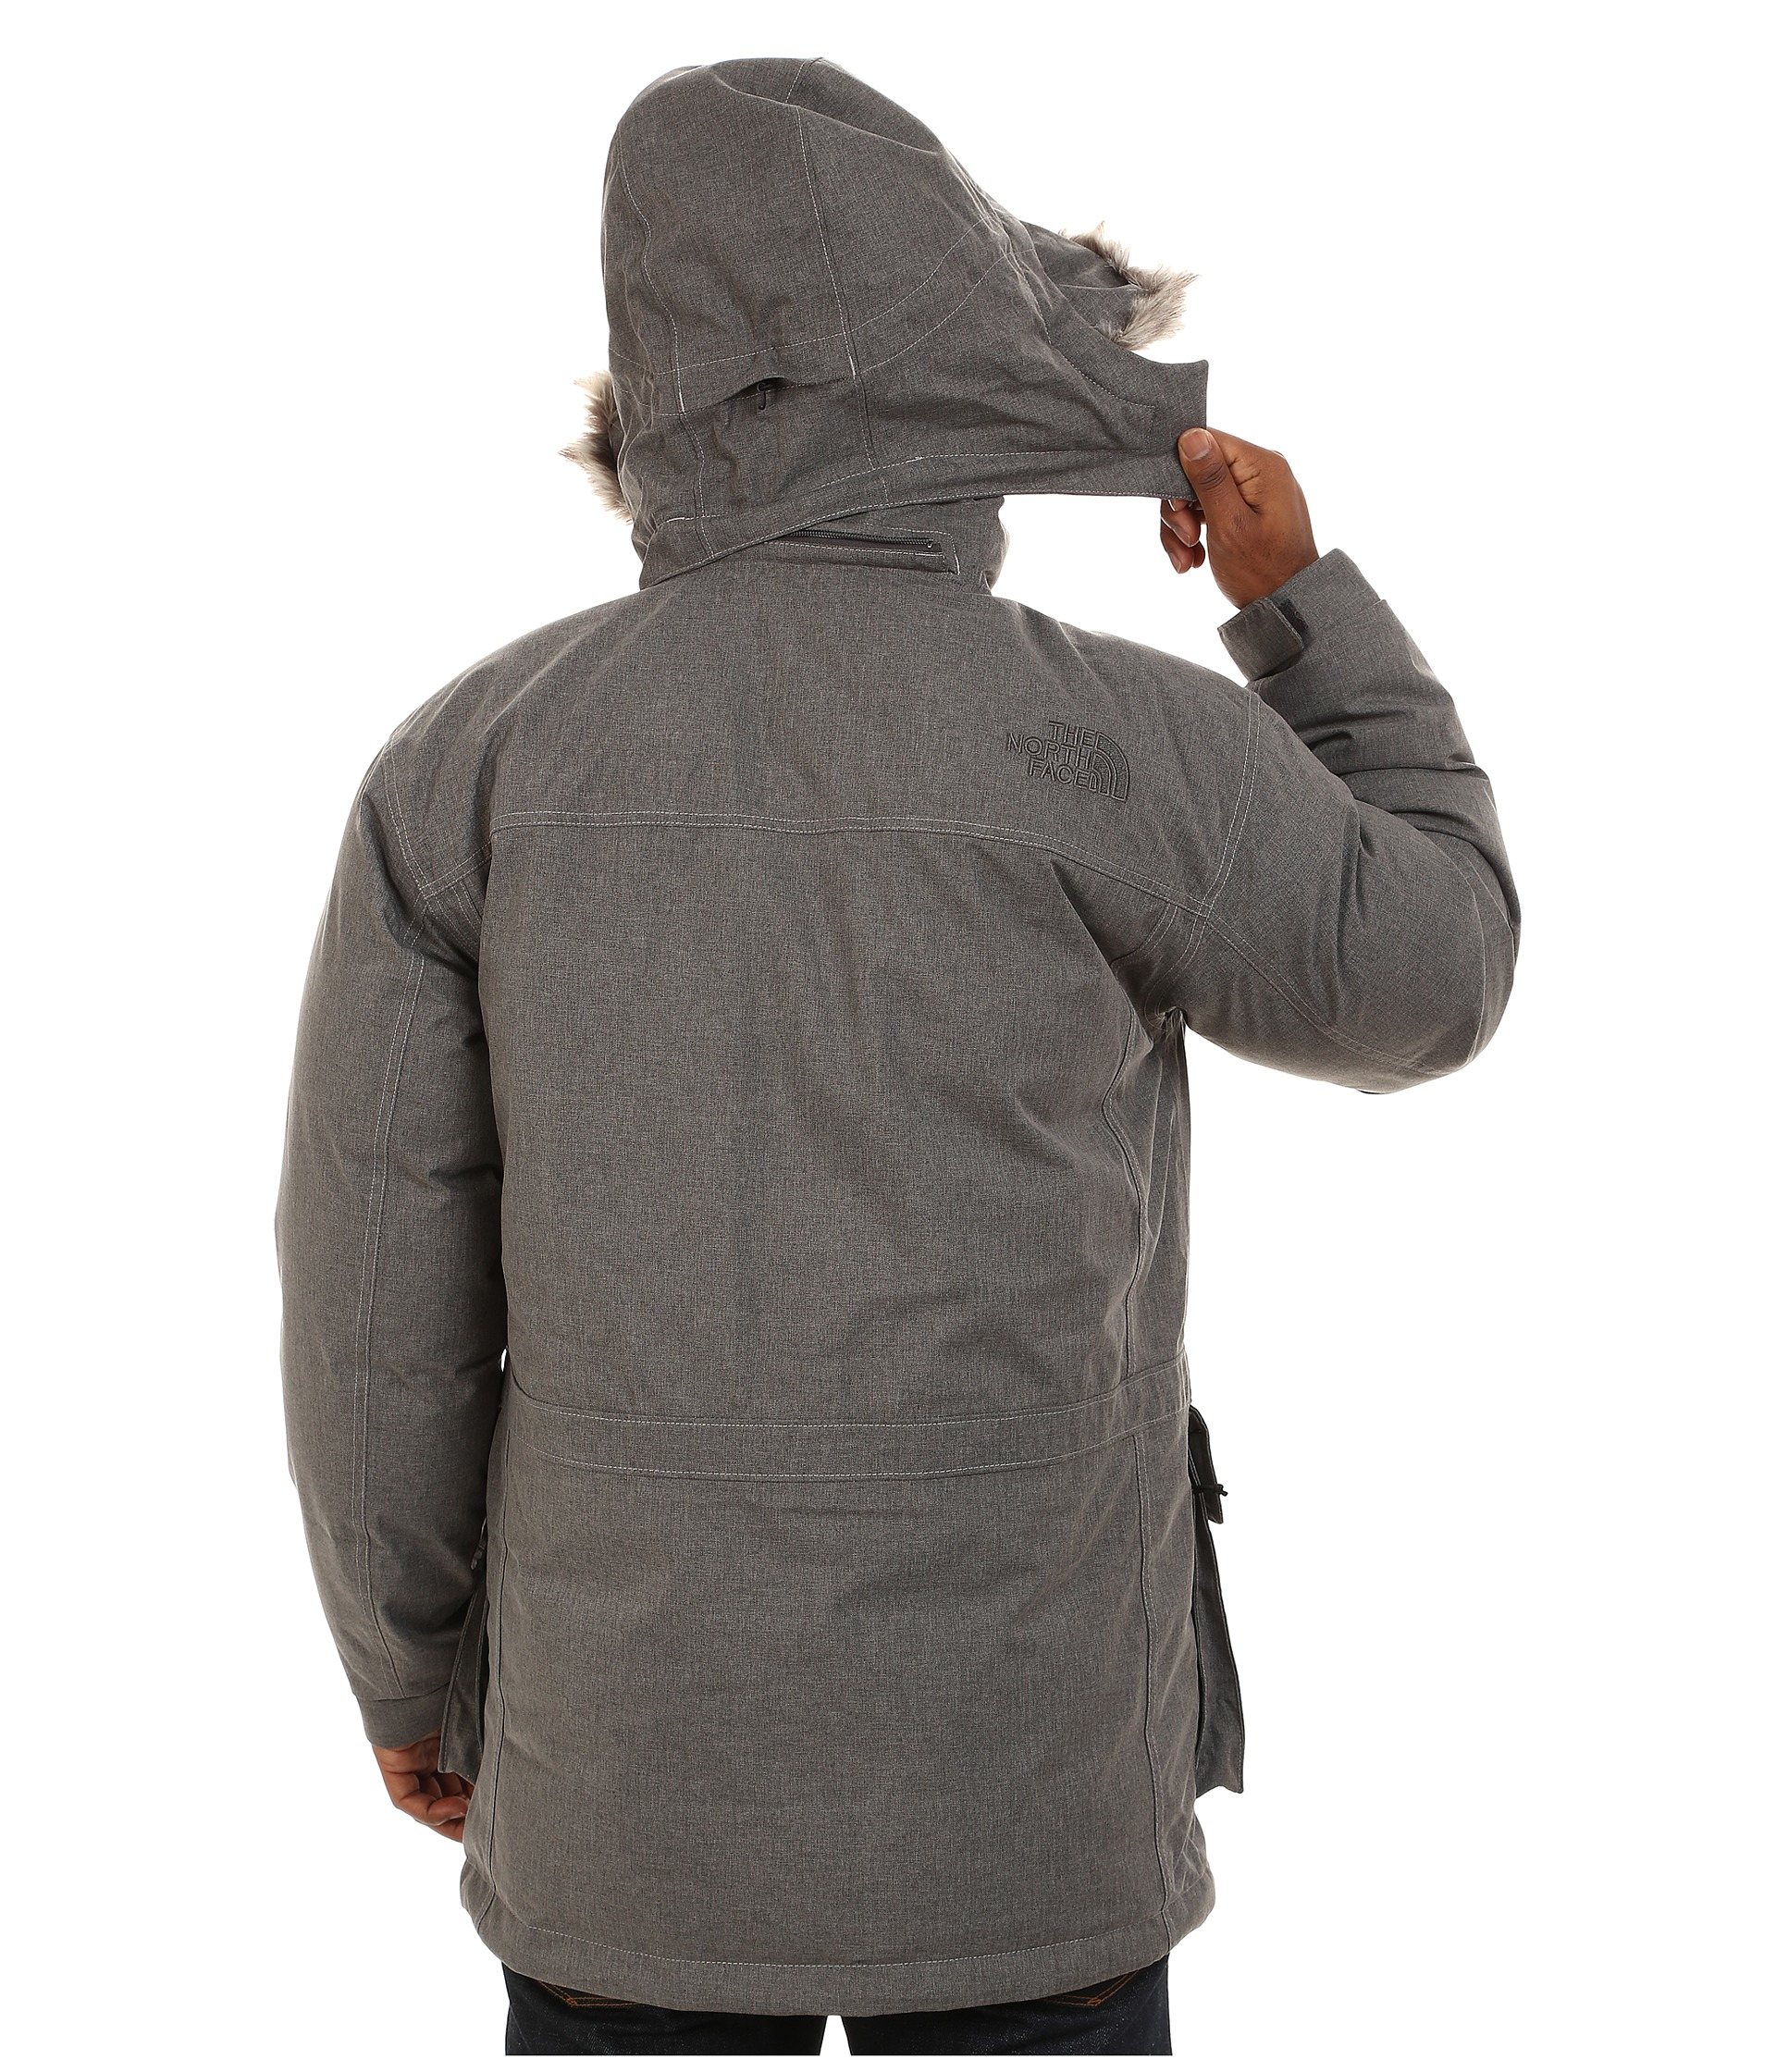 The North Face Mcmurdo Parka Ii in Graphite Grey (Gray) for Men - Lyst